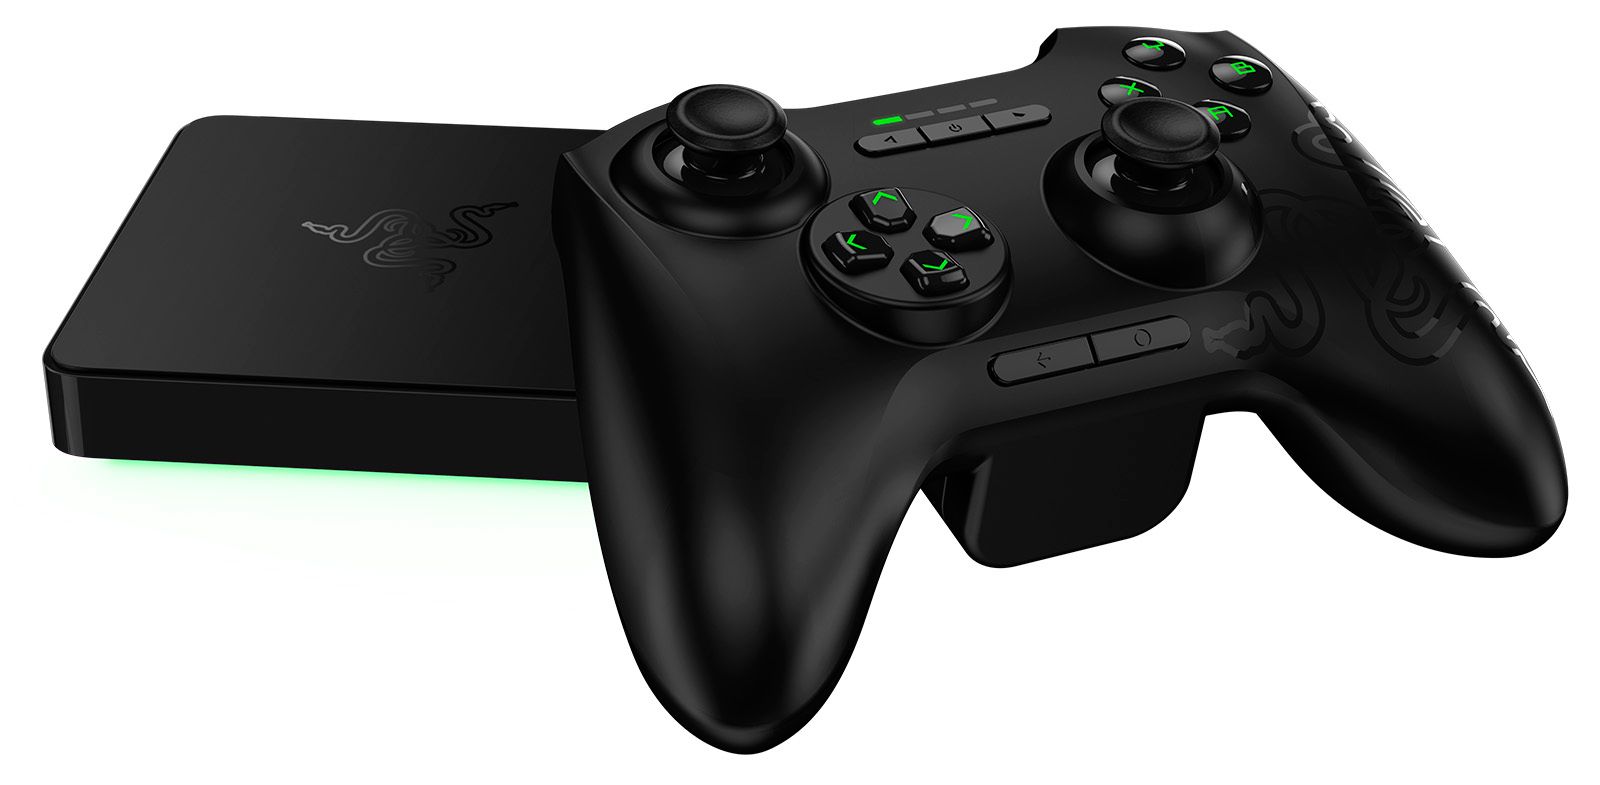 razer forge tv turns your existing tv into an android tv and adds pc game streaming to boot image 1